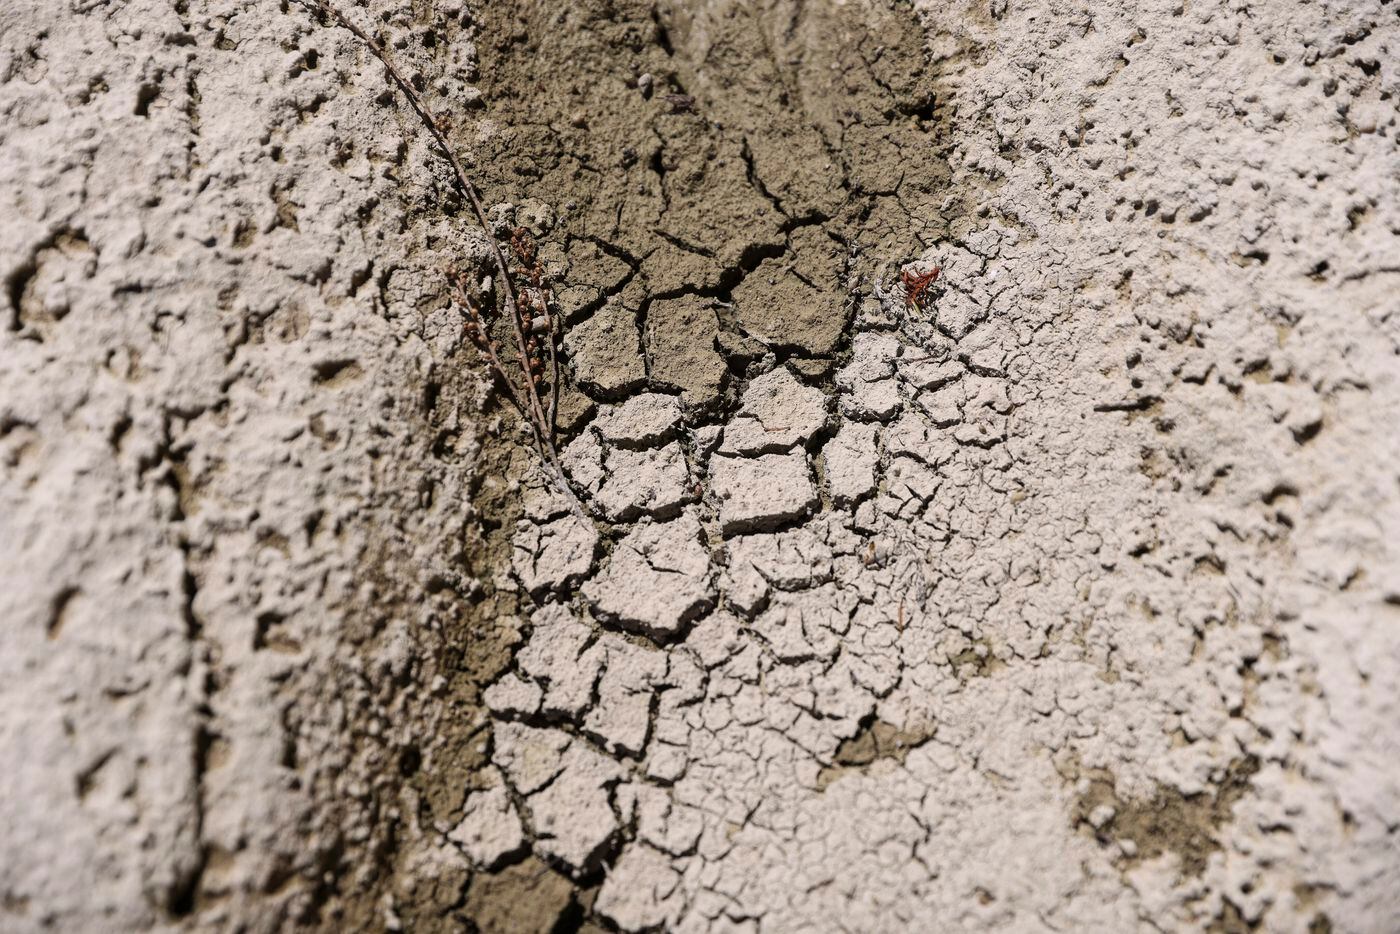 Dried mud in the rock bed of where the Guadalupe River once flowed, Wednesday, August 10,...